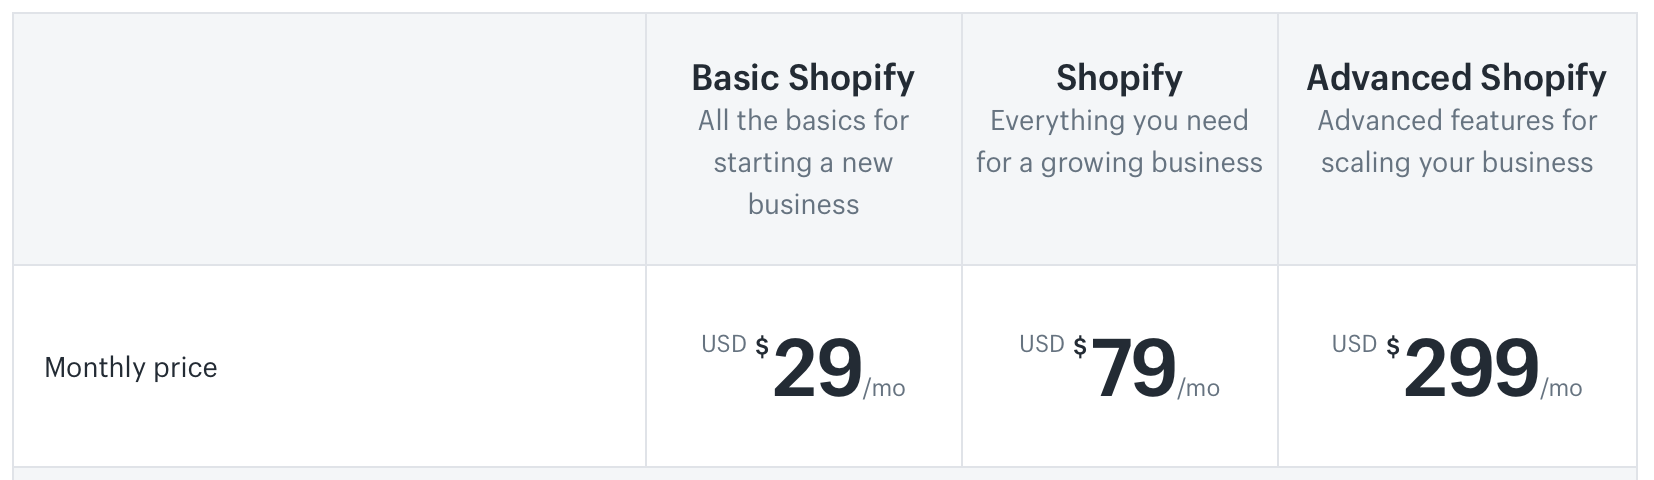 Shopify-pricing